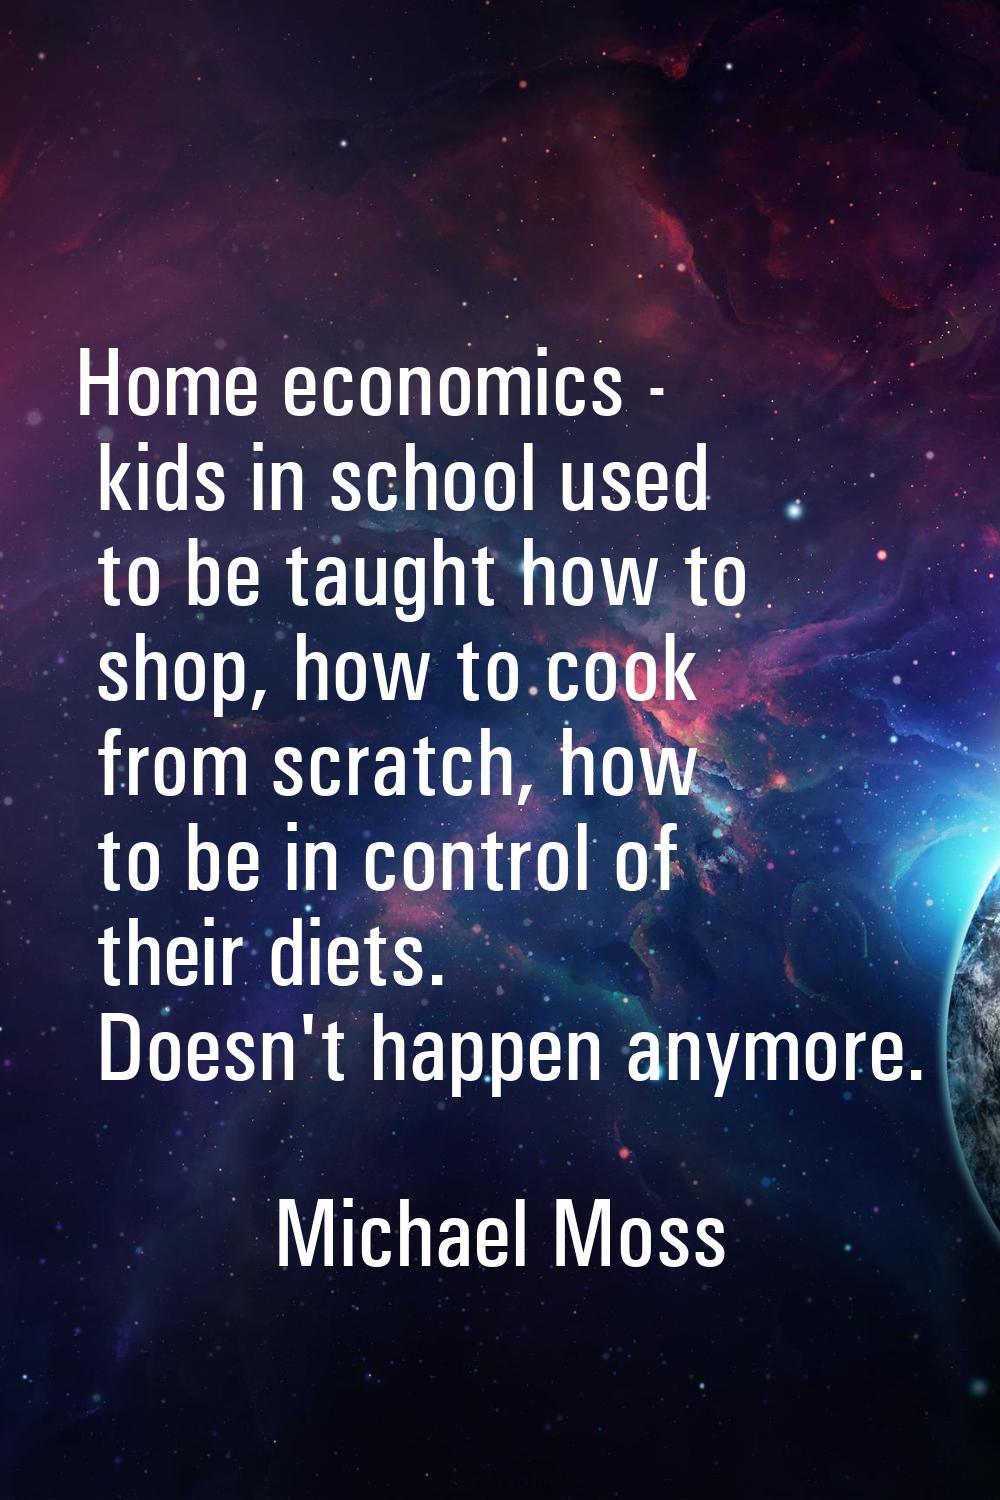 Home economics - kids in school used to be taught how to shop, how to cook from scratch, how to be 